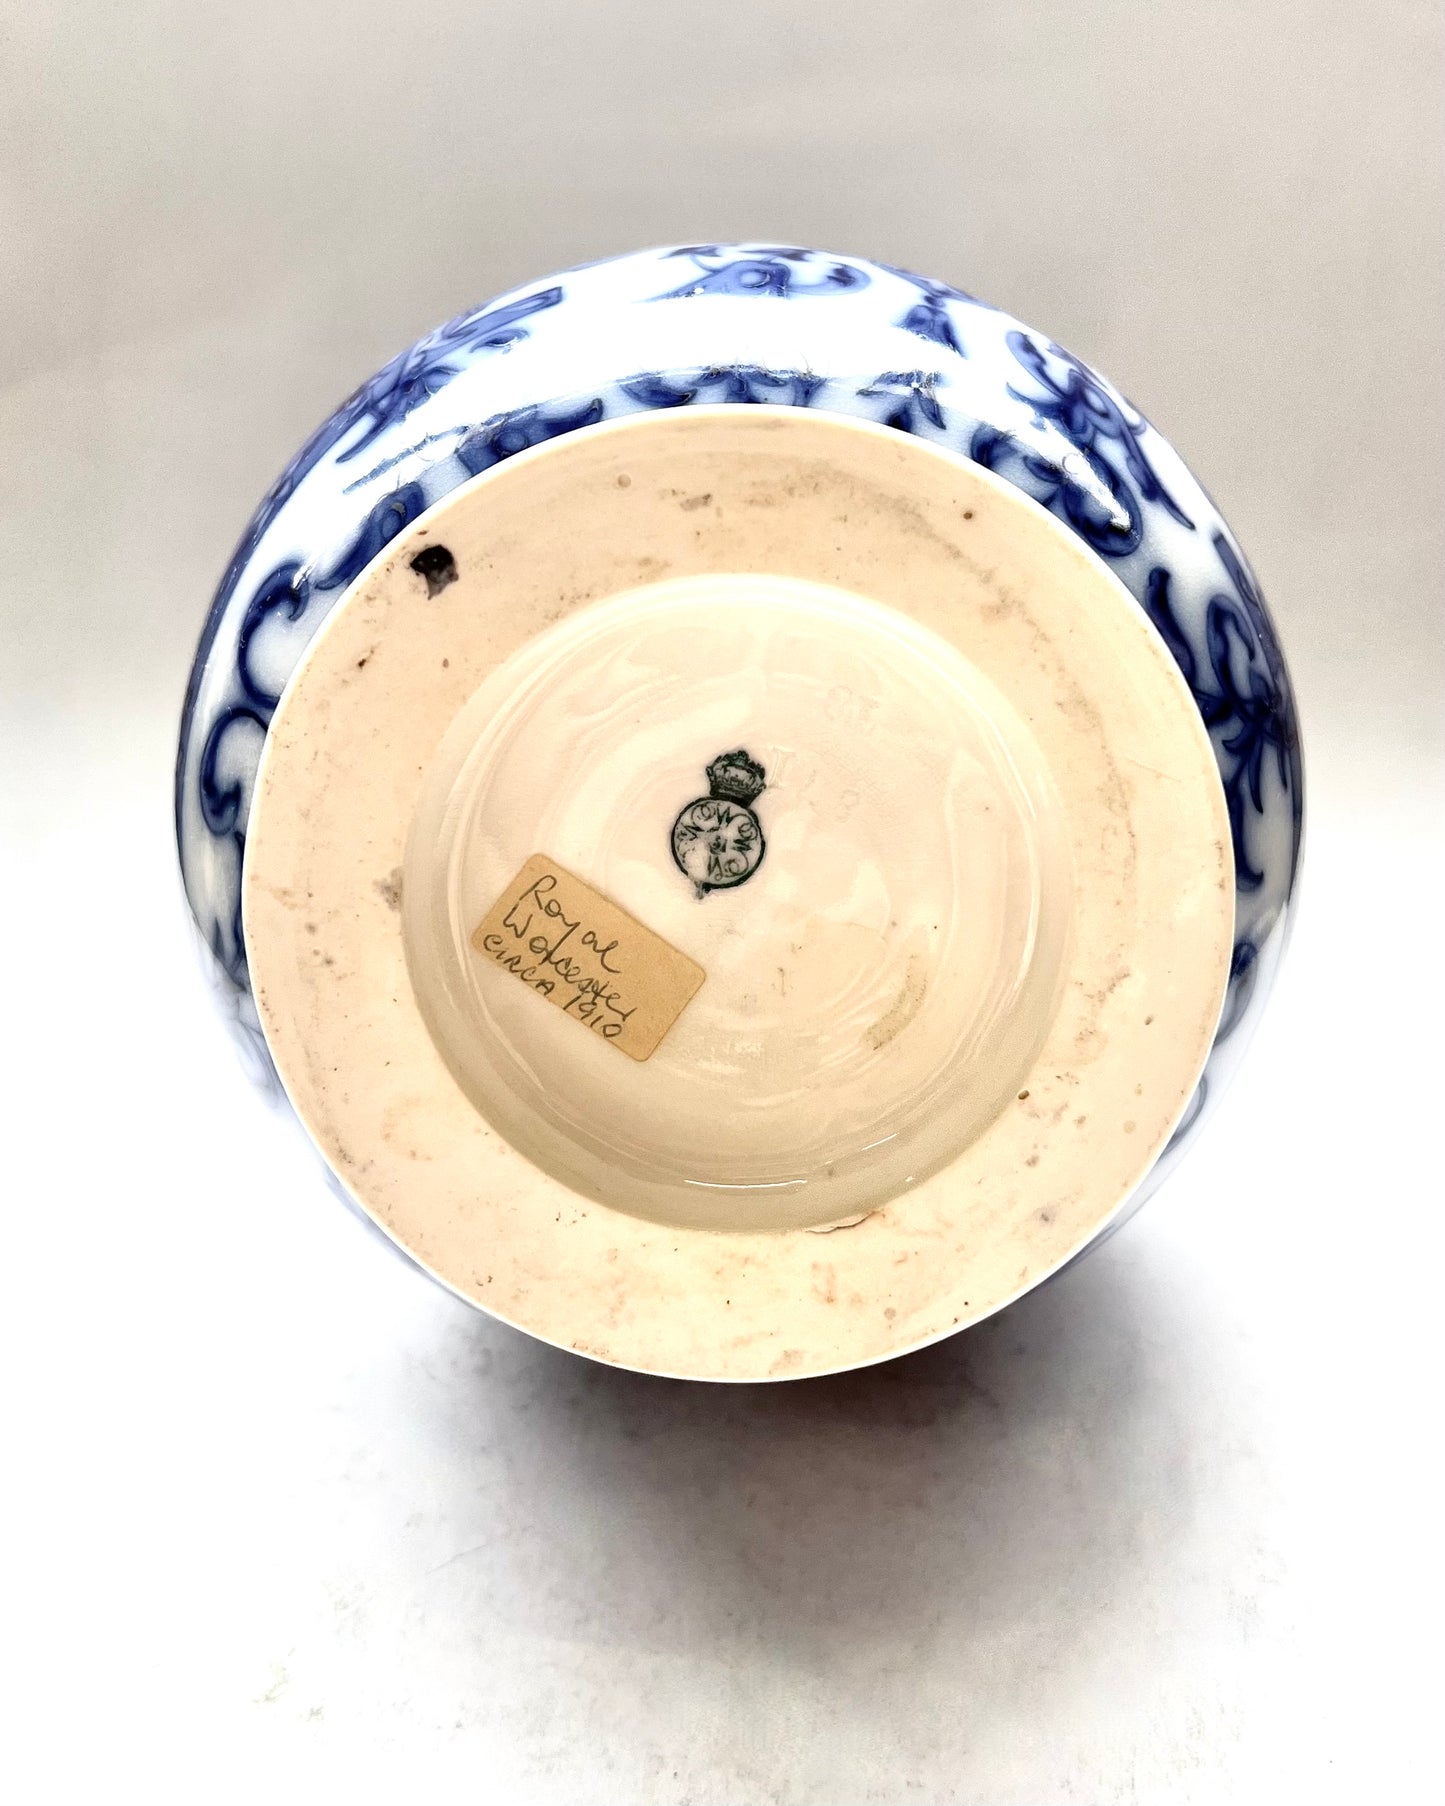 Rare late 19th century Royal Worcester blue and white double-handled porcelain vase  c.1900-1910